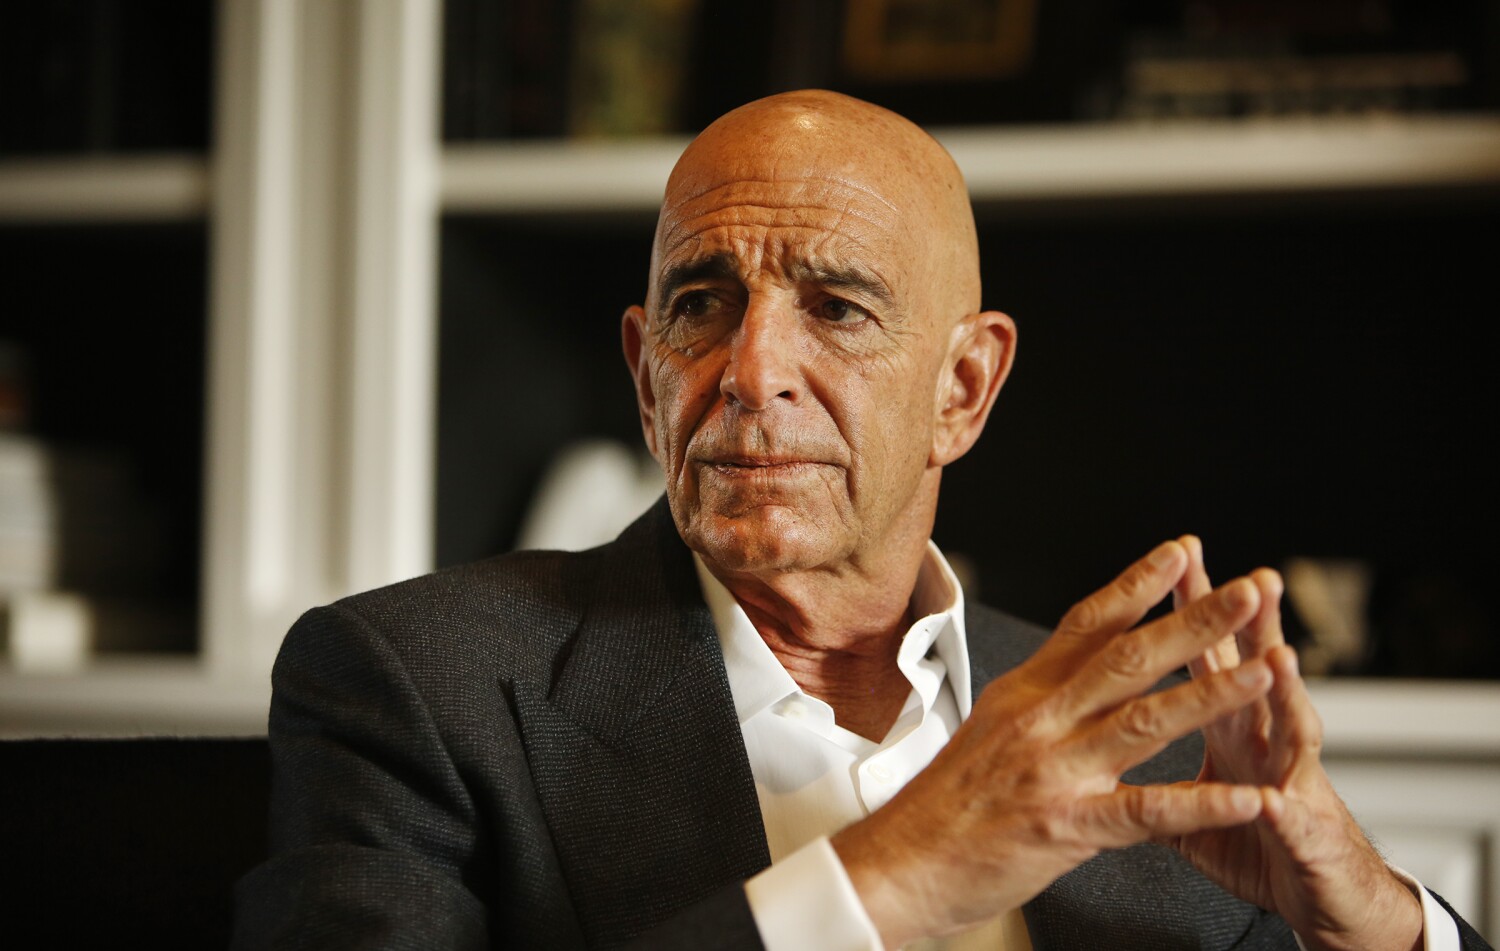 Tom Barrack, L.A. investor and Trump ally, charged with acting as agent of UAE